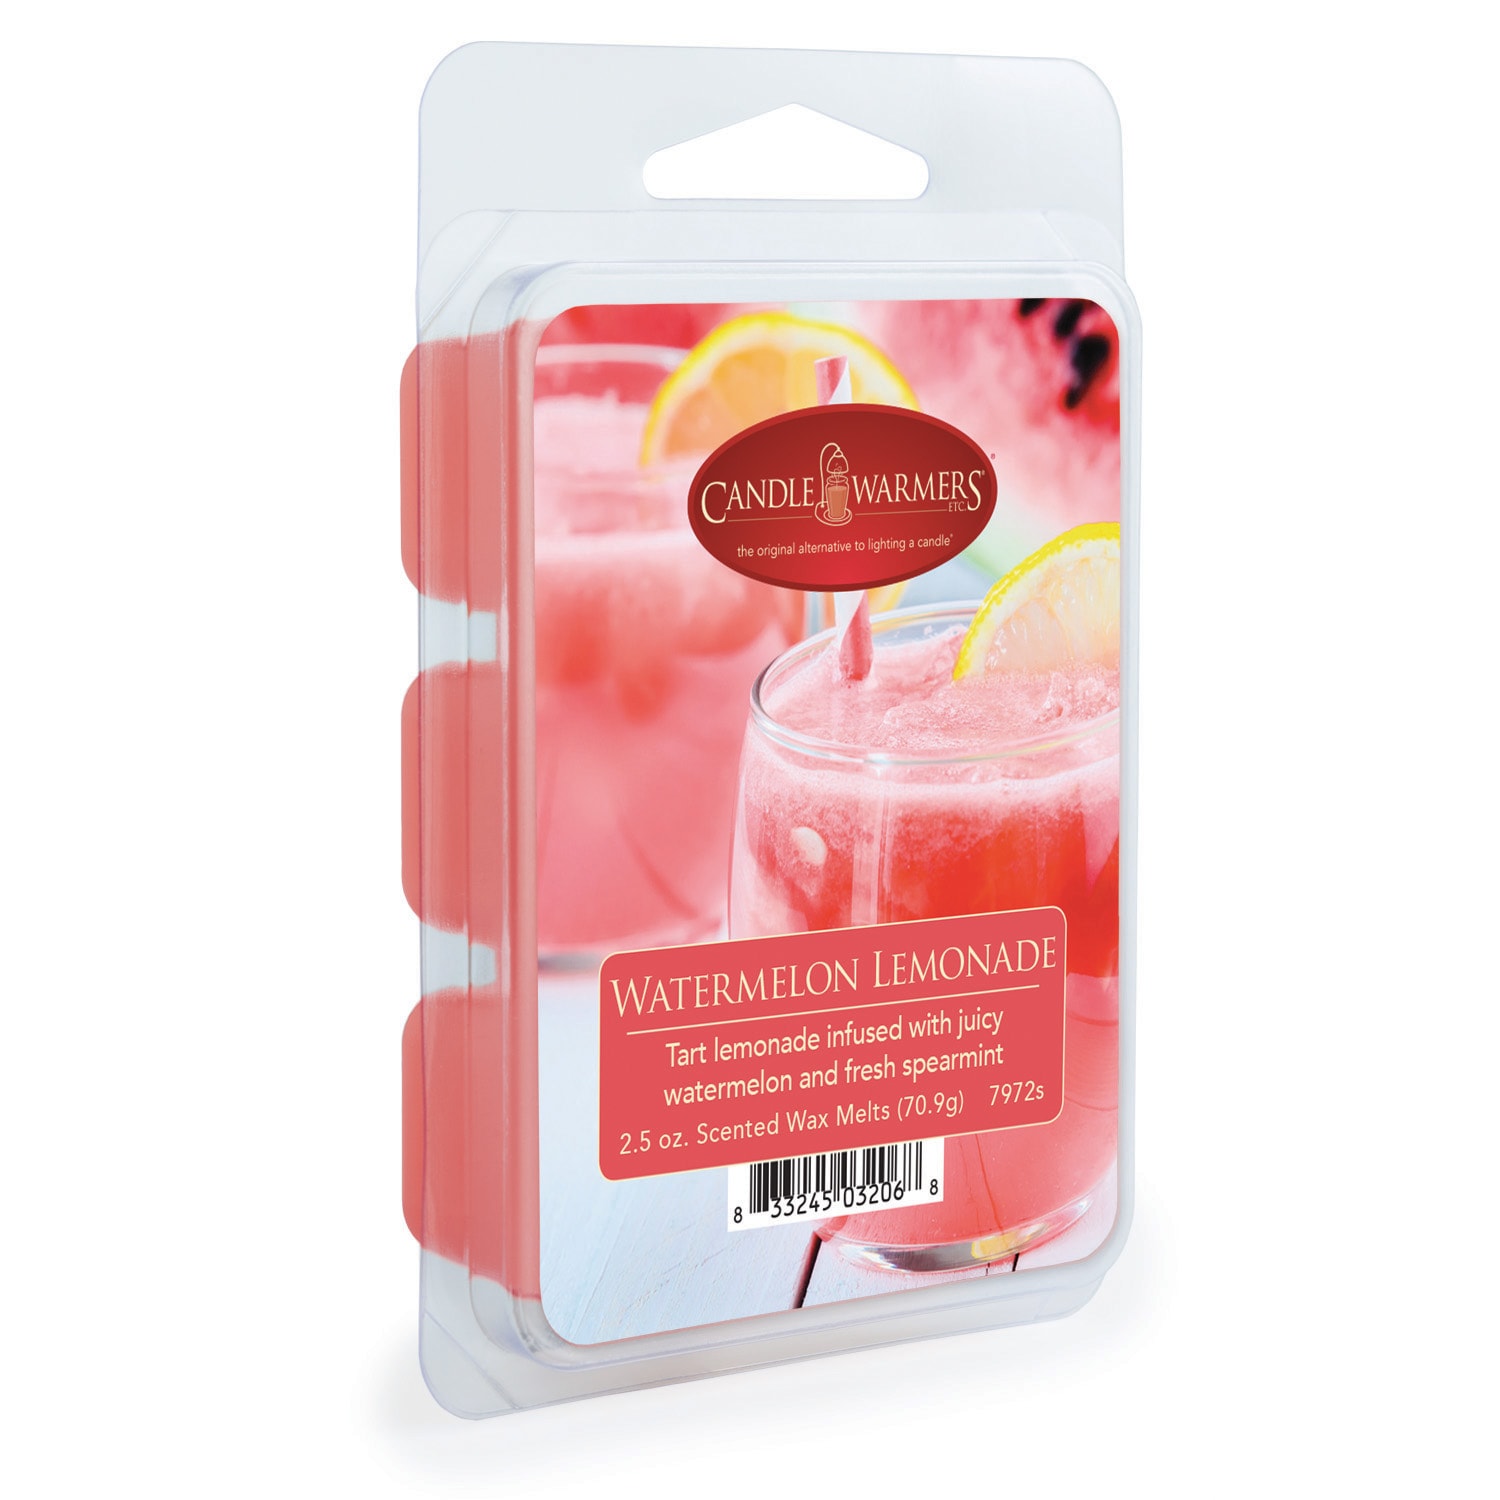 Lasts over 96 Hours 6 Glade Wax Melts SPICED APPLE MAGIC Scent -2.3 oz 